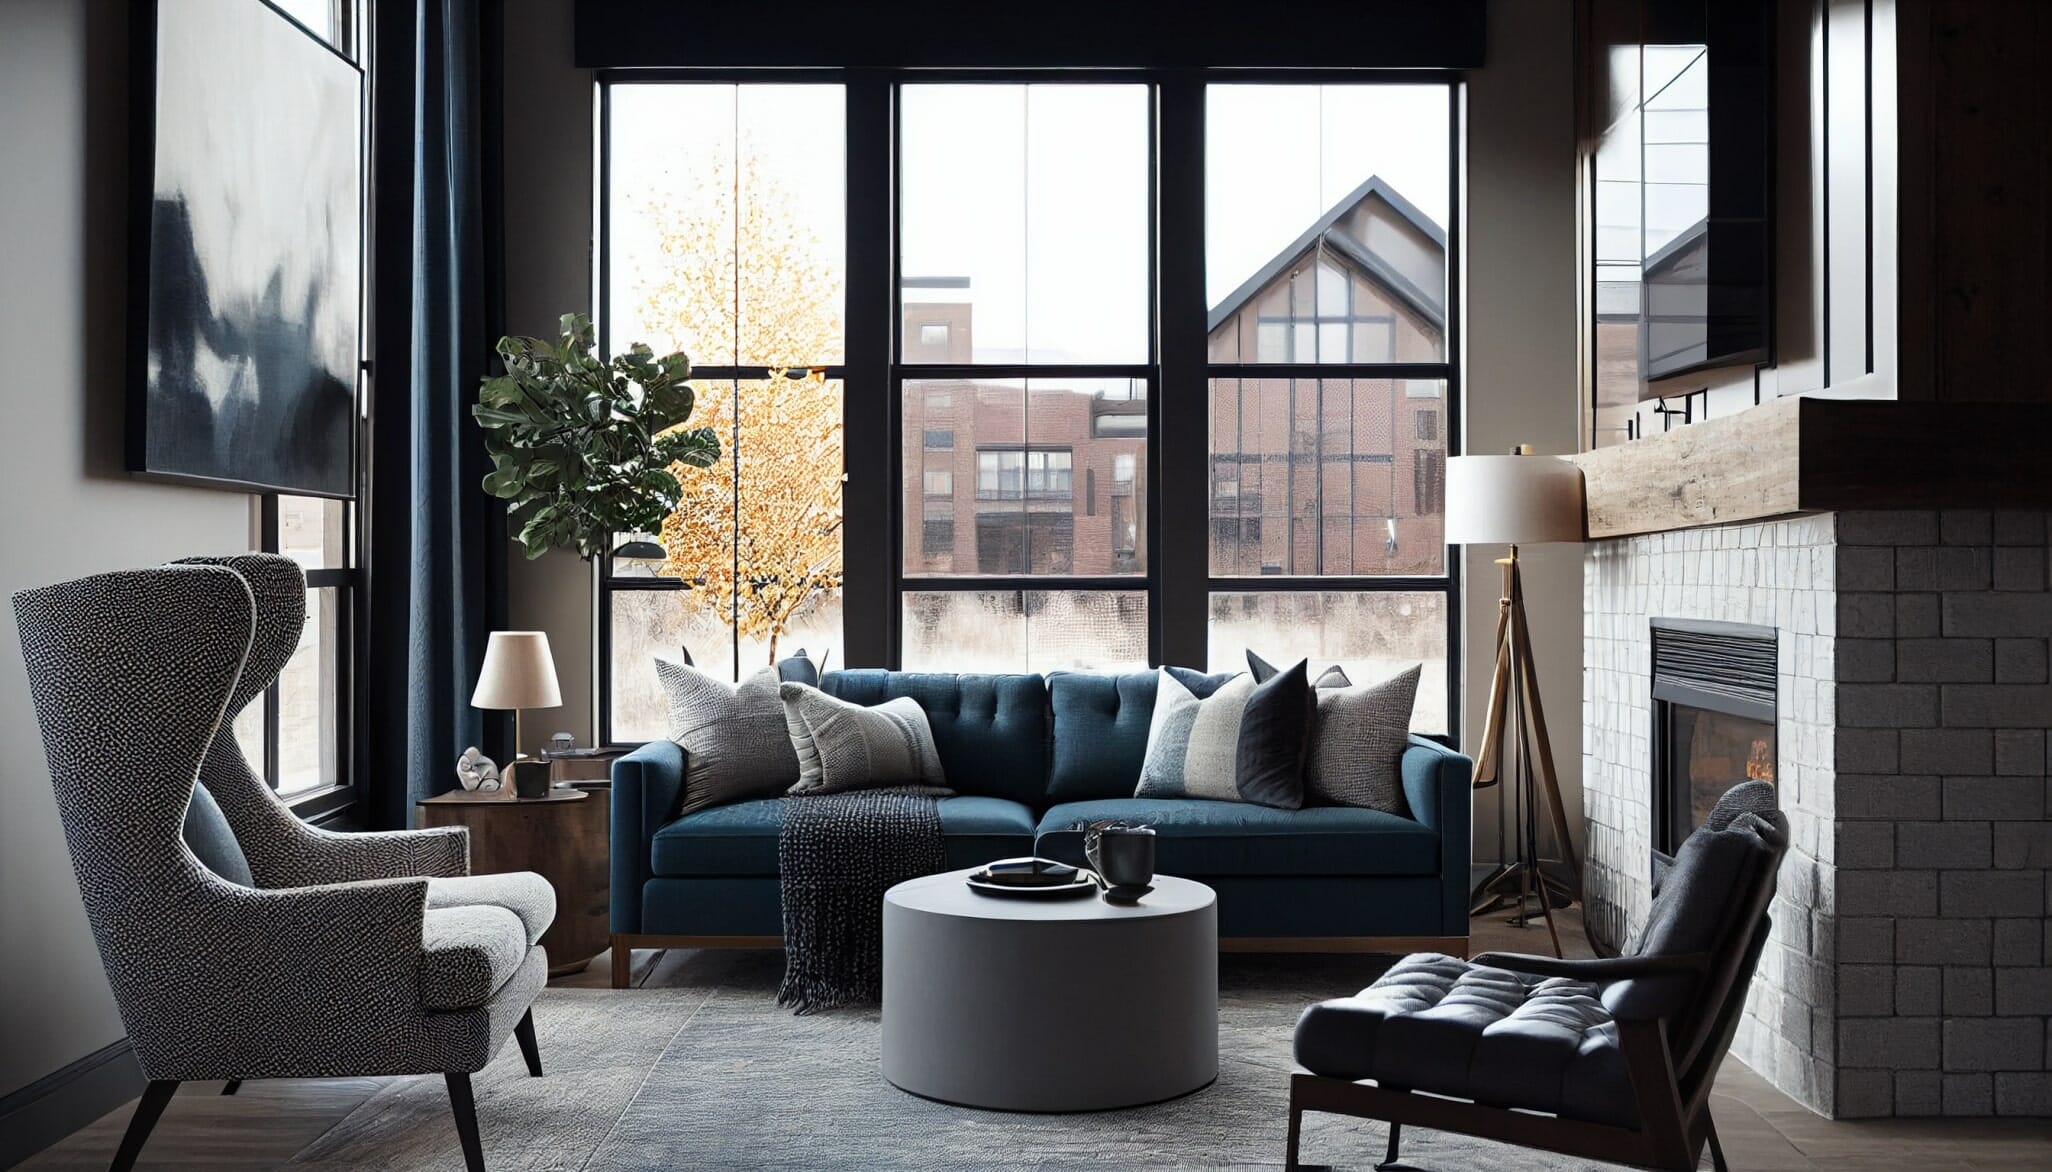 Masculine interiors with blue accents